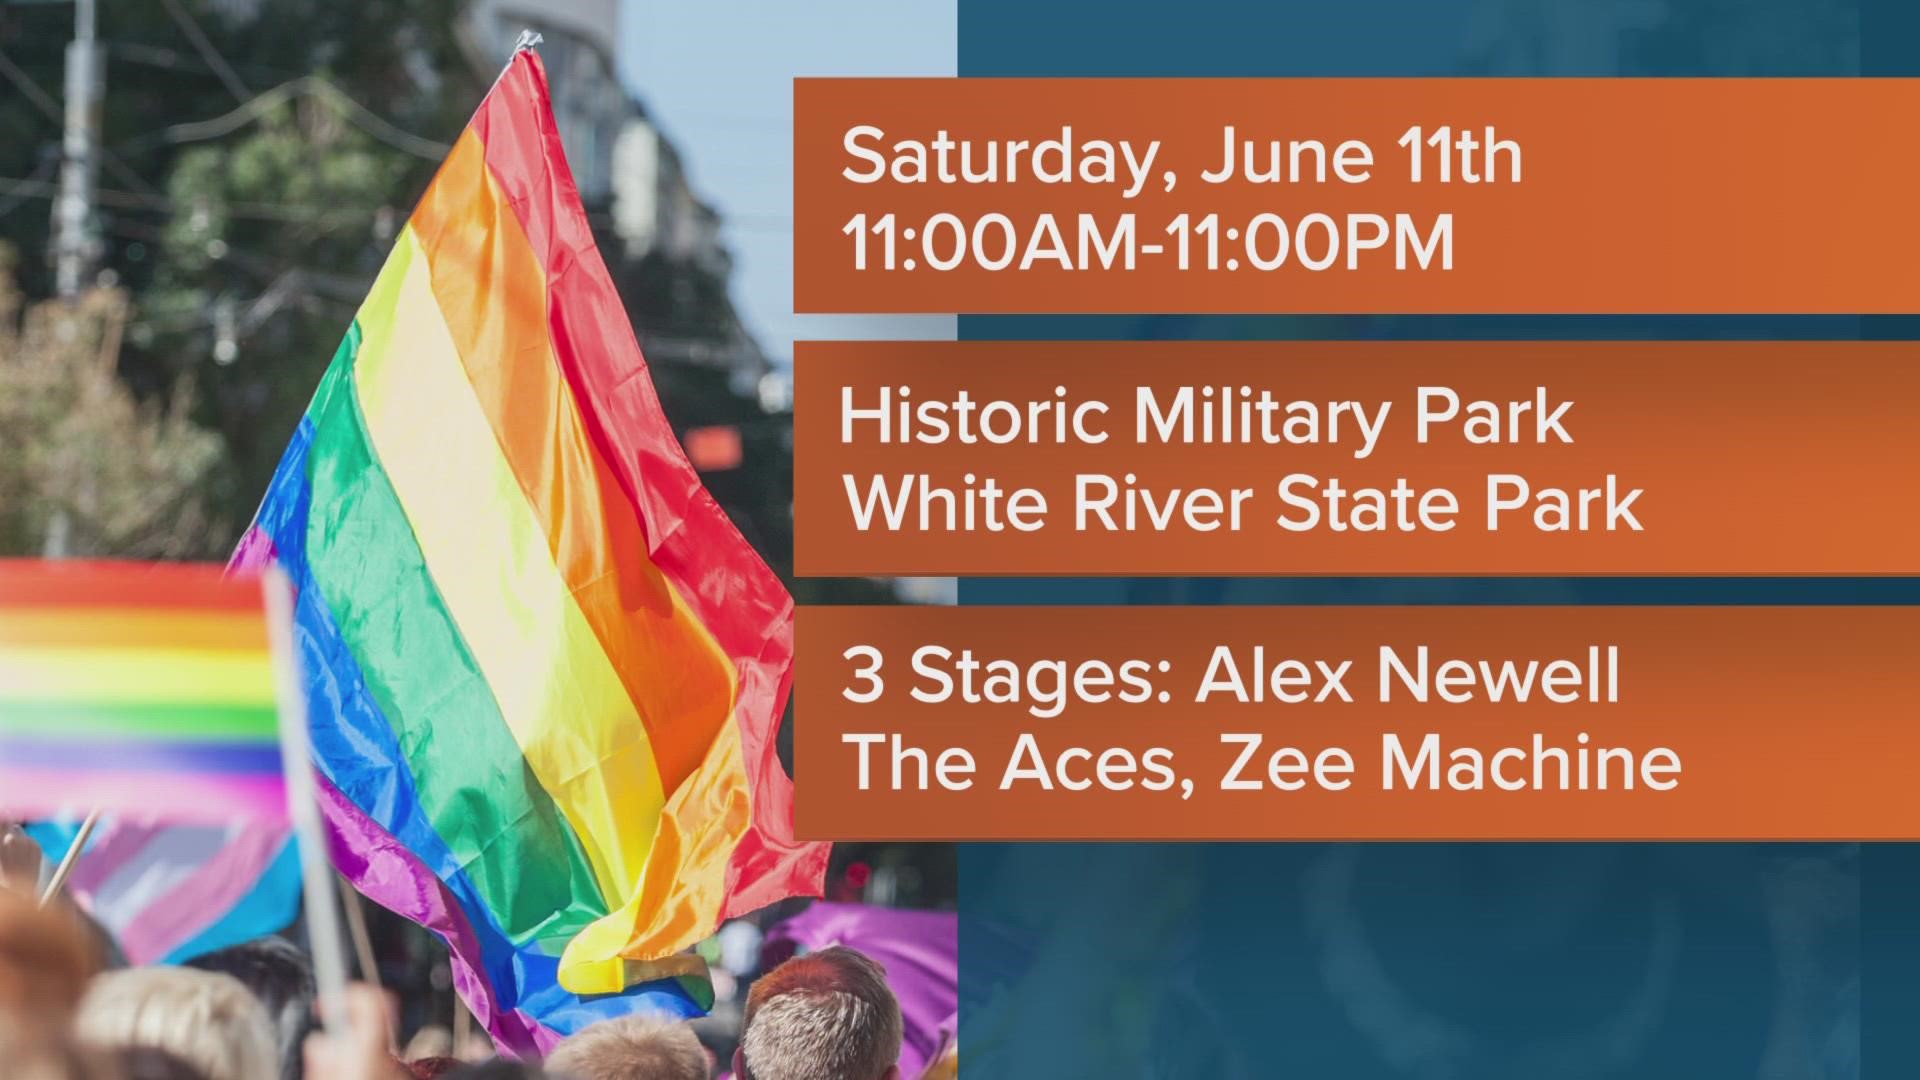 Indy Pride Festival, presented by Salesforce, will be held Saturday, June 11 from 11 a.m. to 11 p.m. at Historic Military Park at White River State Park.